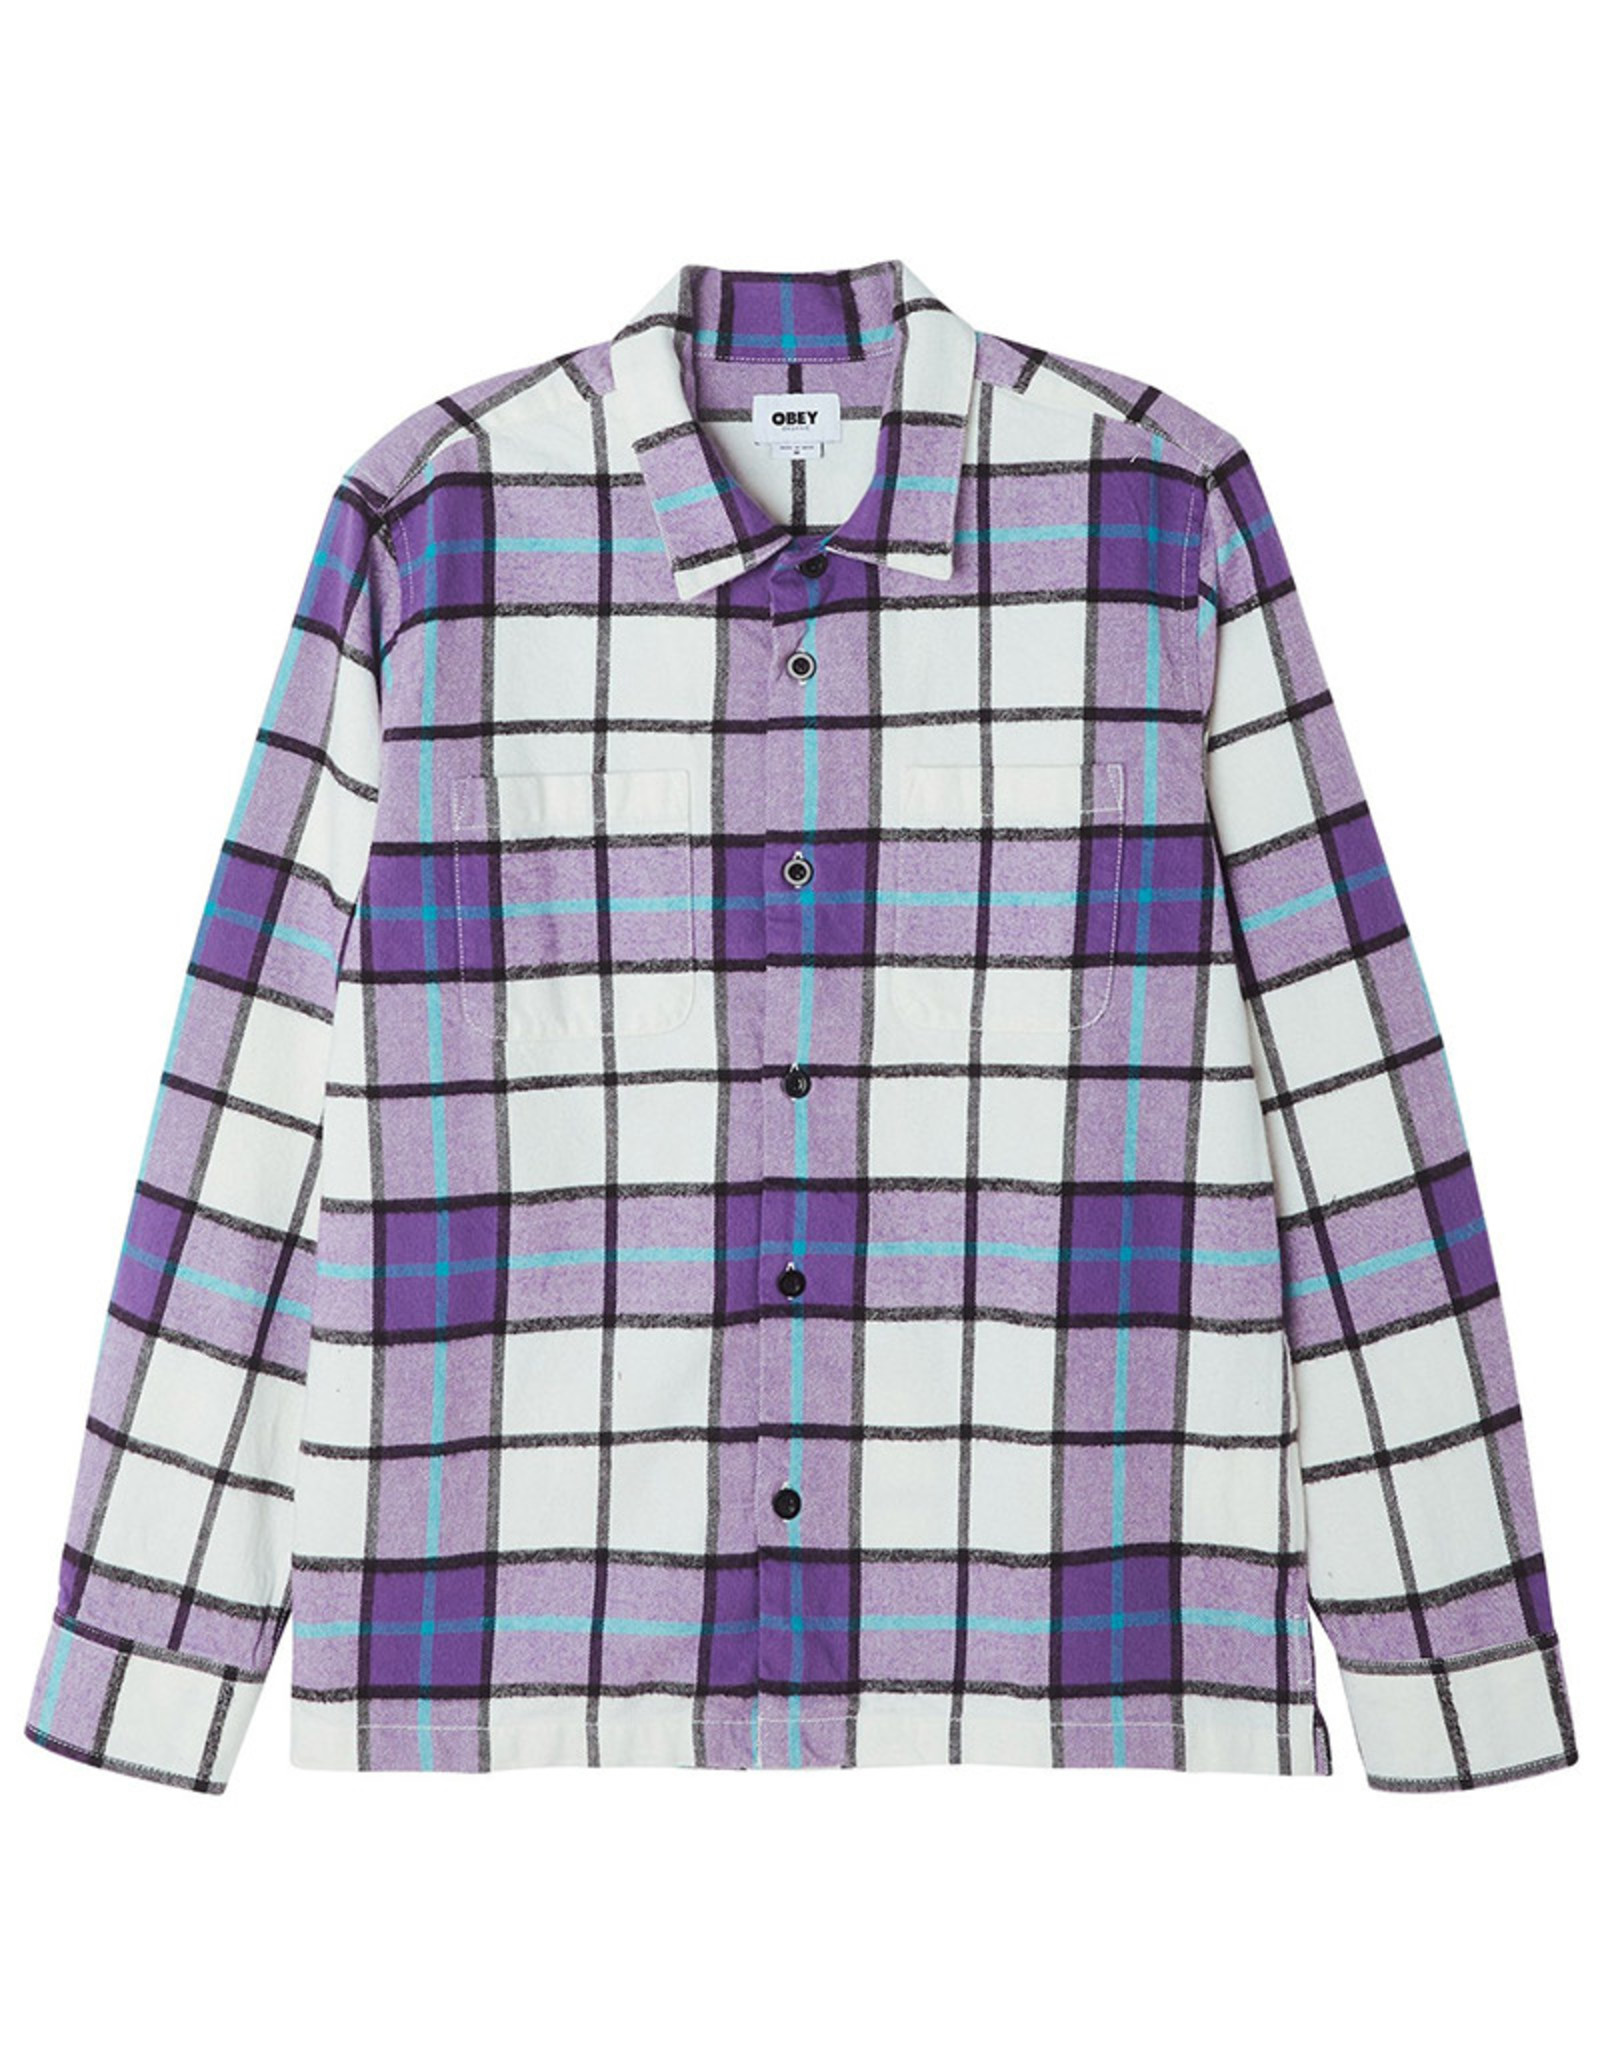 OBEY Sully Woven Shirt